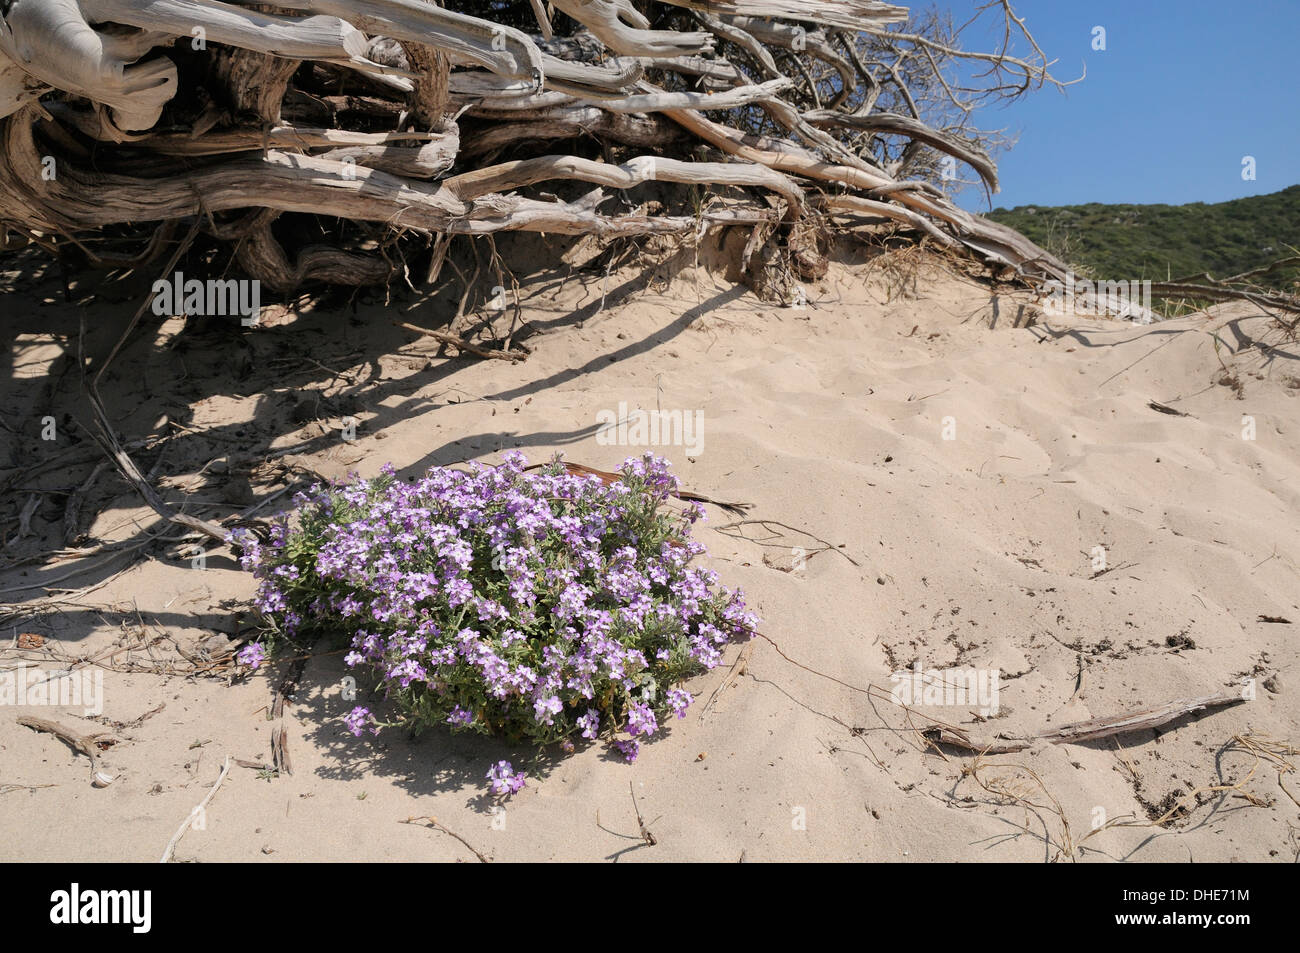 Sea rocket (Cakile maritima) clump flowering in sand dune behind a beach near a pile of driftwood, Tizzano, Corsica, France. Stock Photo